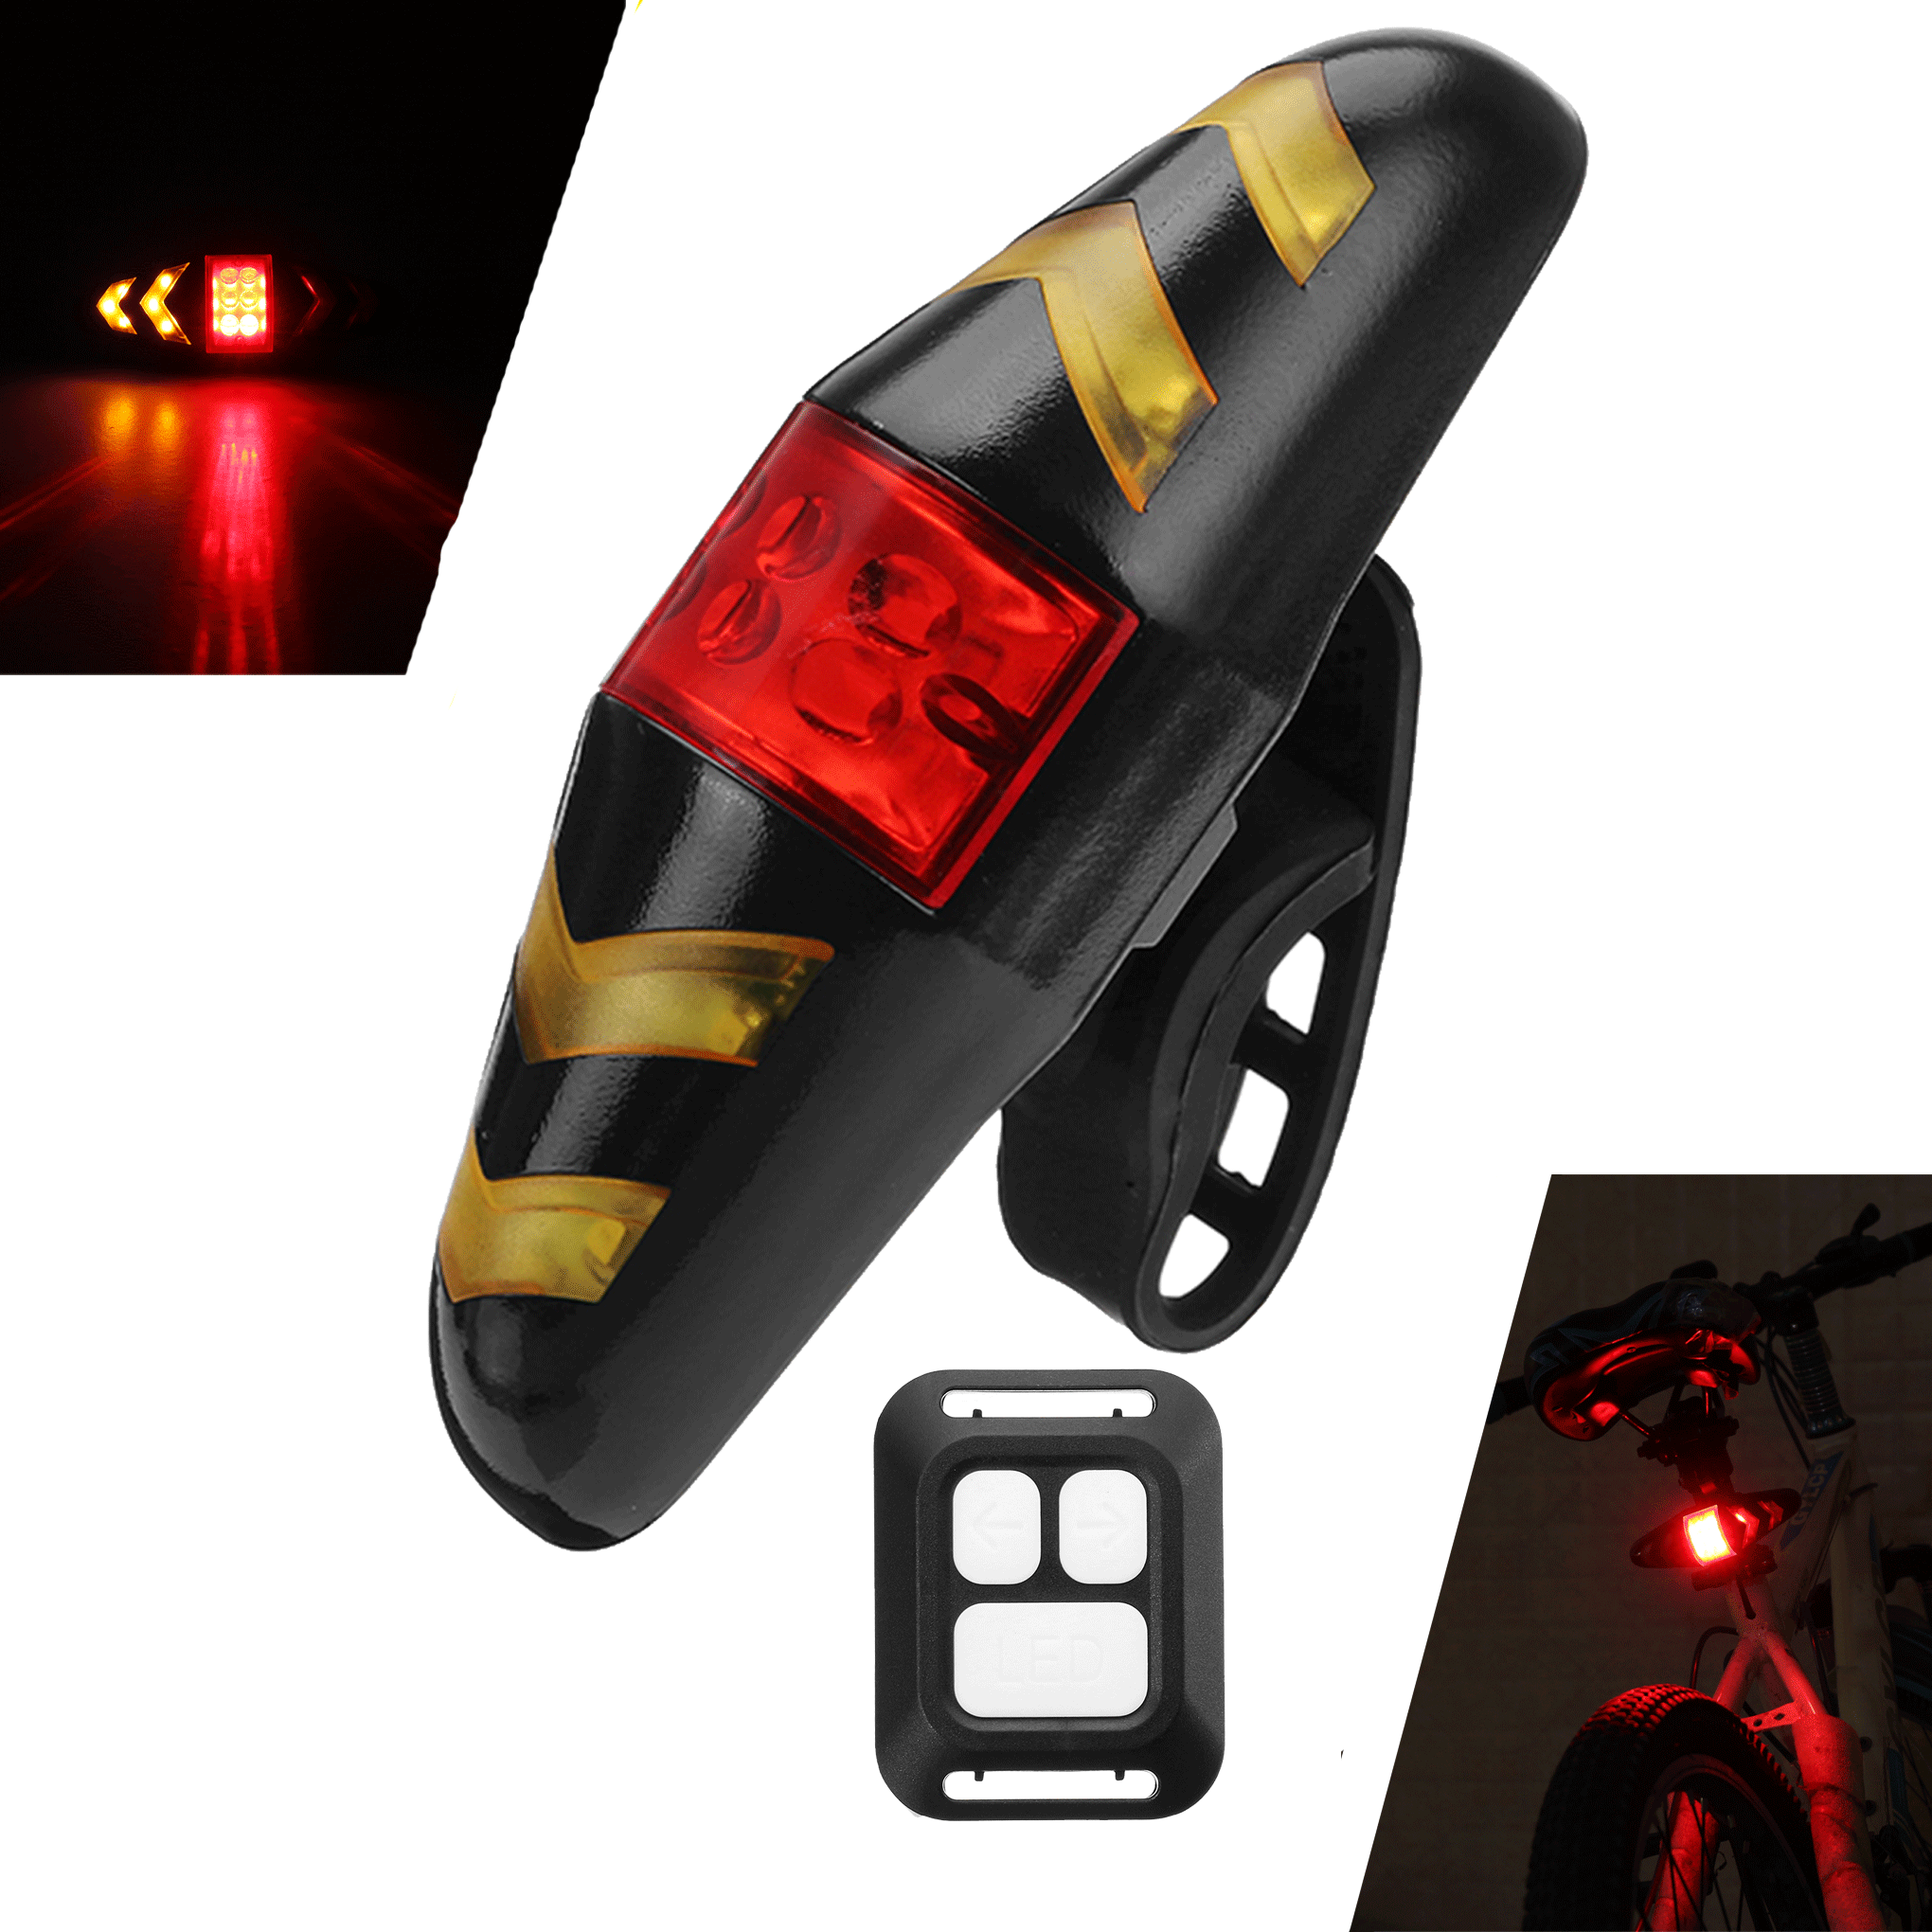 Bicycle Bike Rear LED Tail Turn Signal Light With Remote Control Rechargeable US